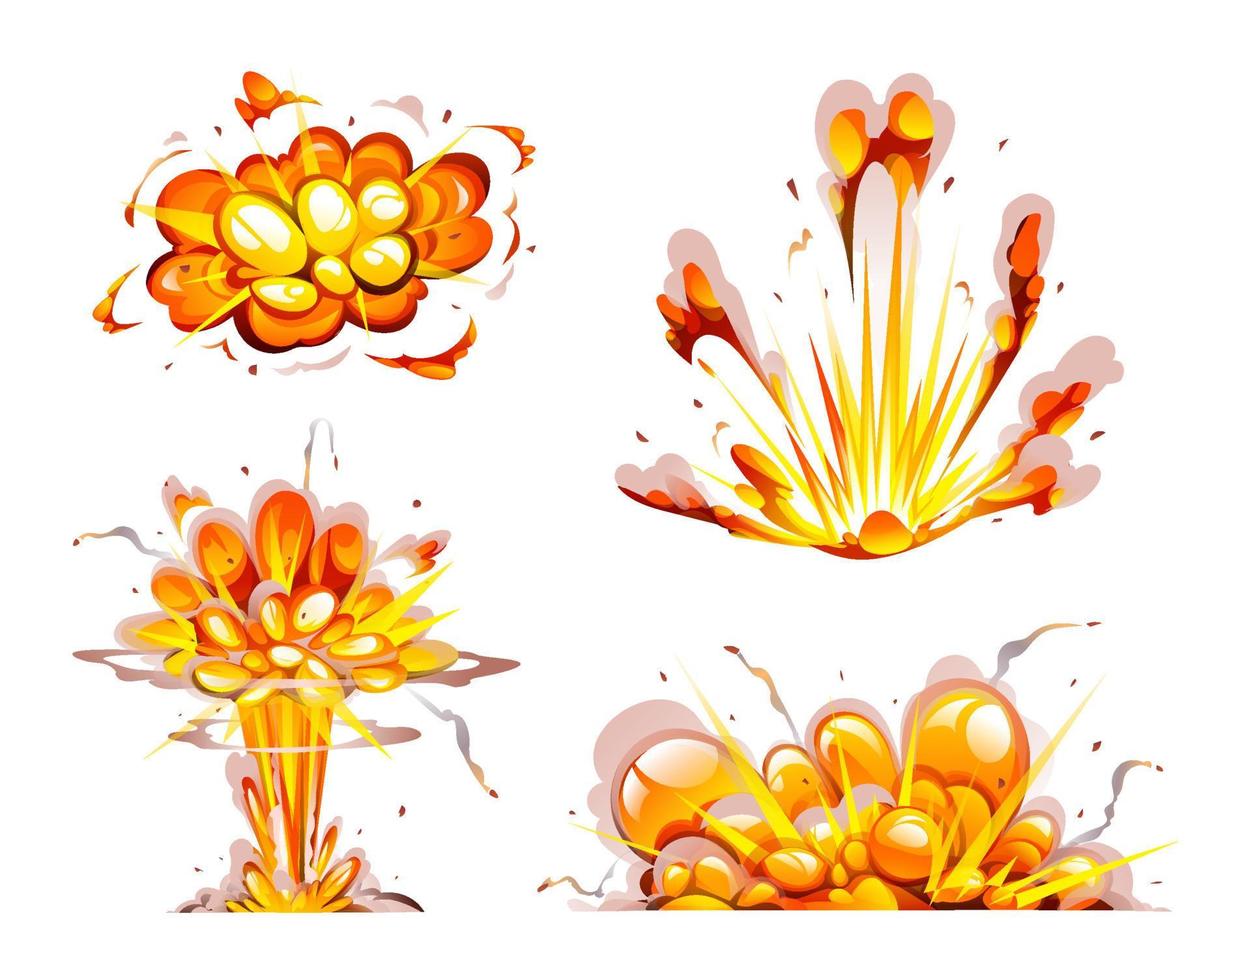 Bomb explosion vector set. Atomic explosion with smoke, flame and particles cartoon illustration